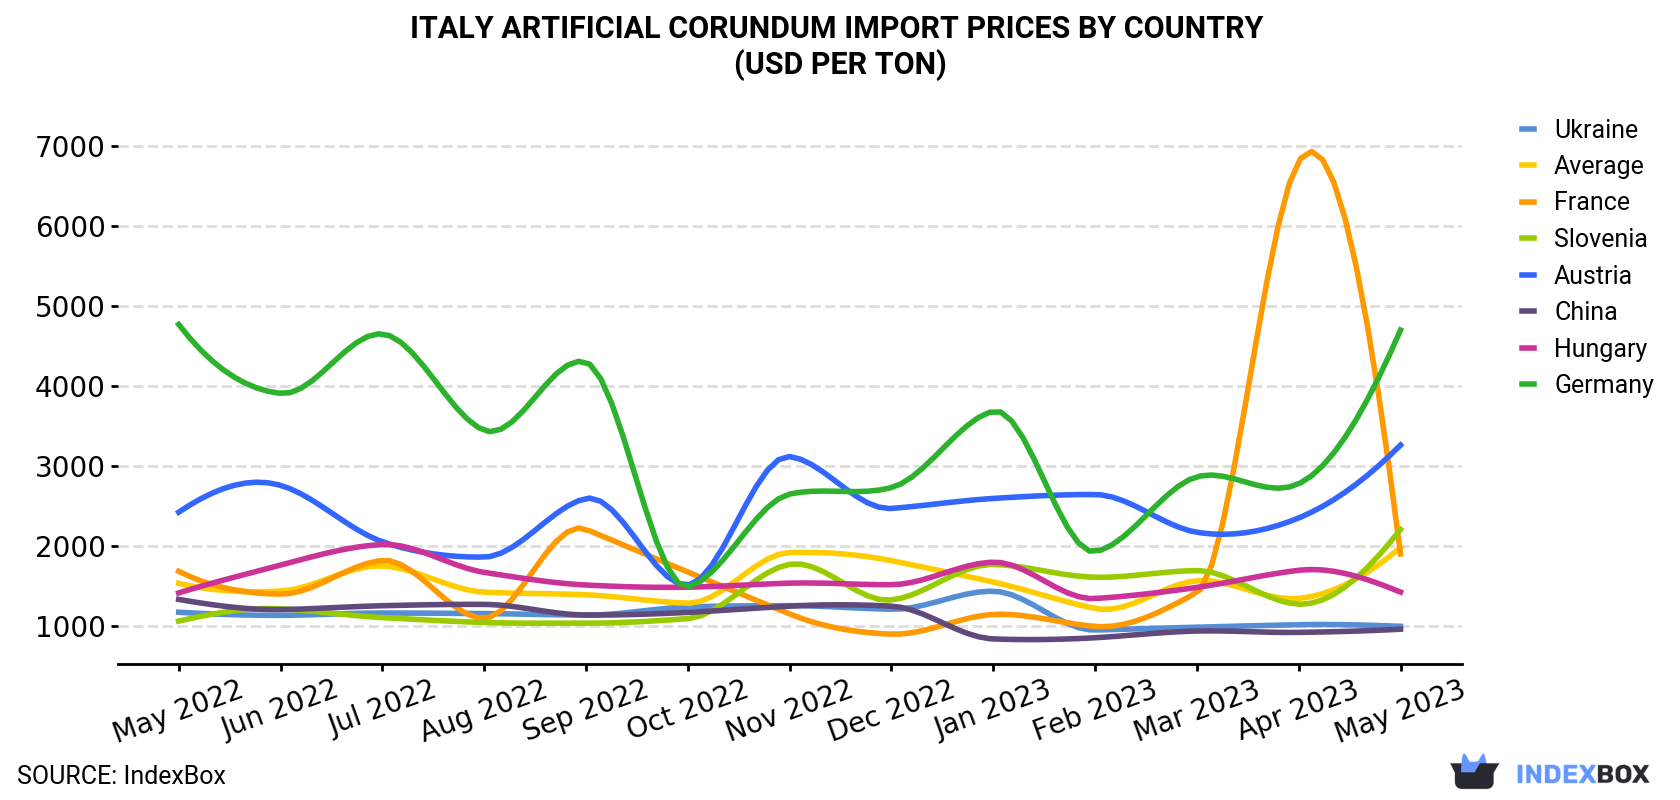 Italy Artificial Corundum Import Prices By Country (USD Per Ton)